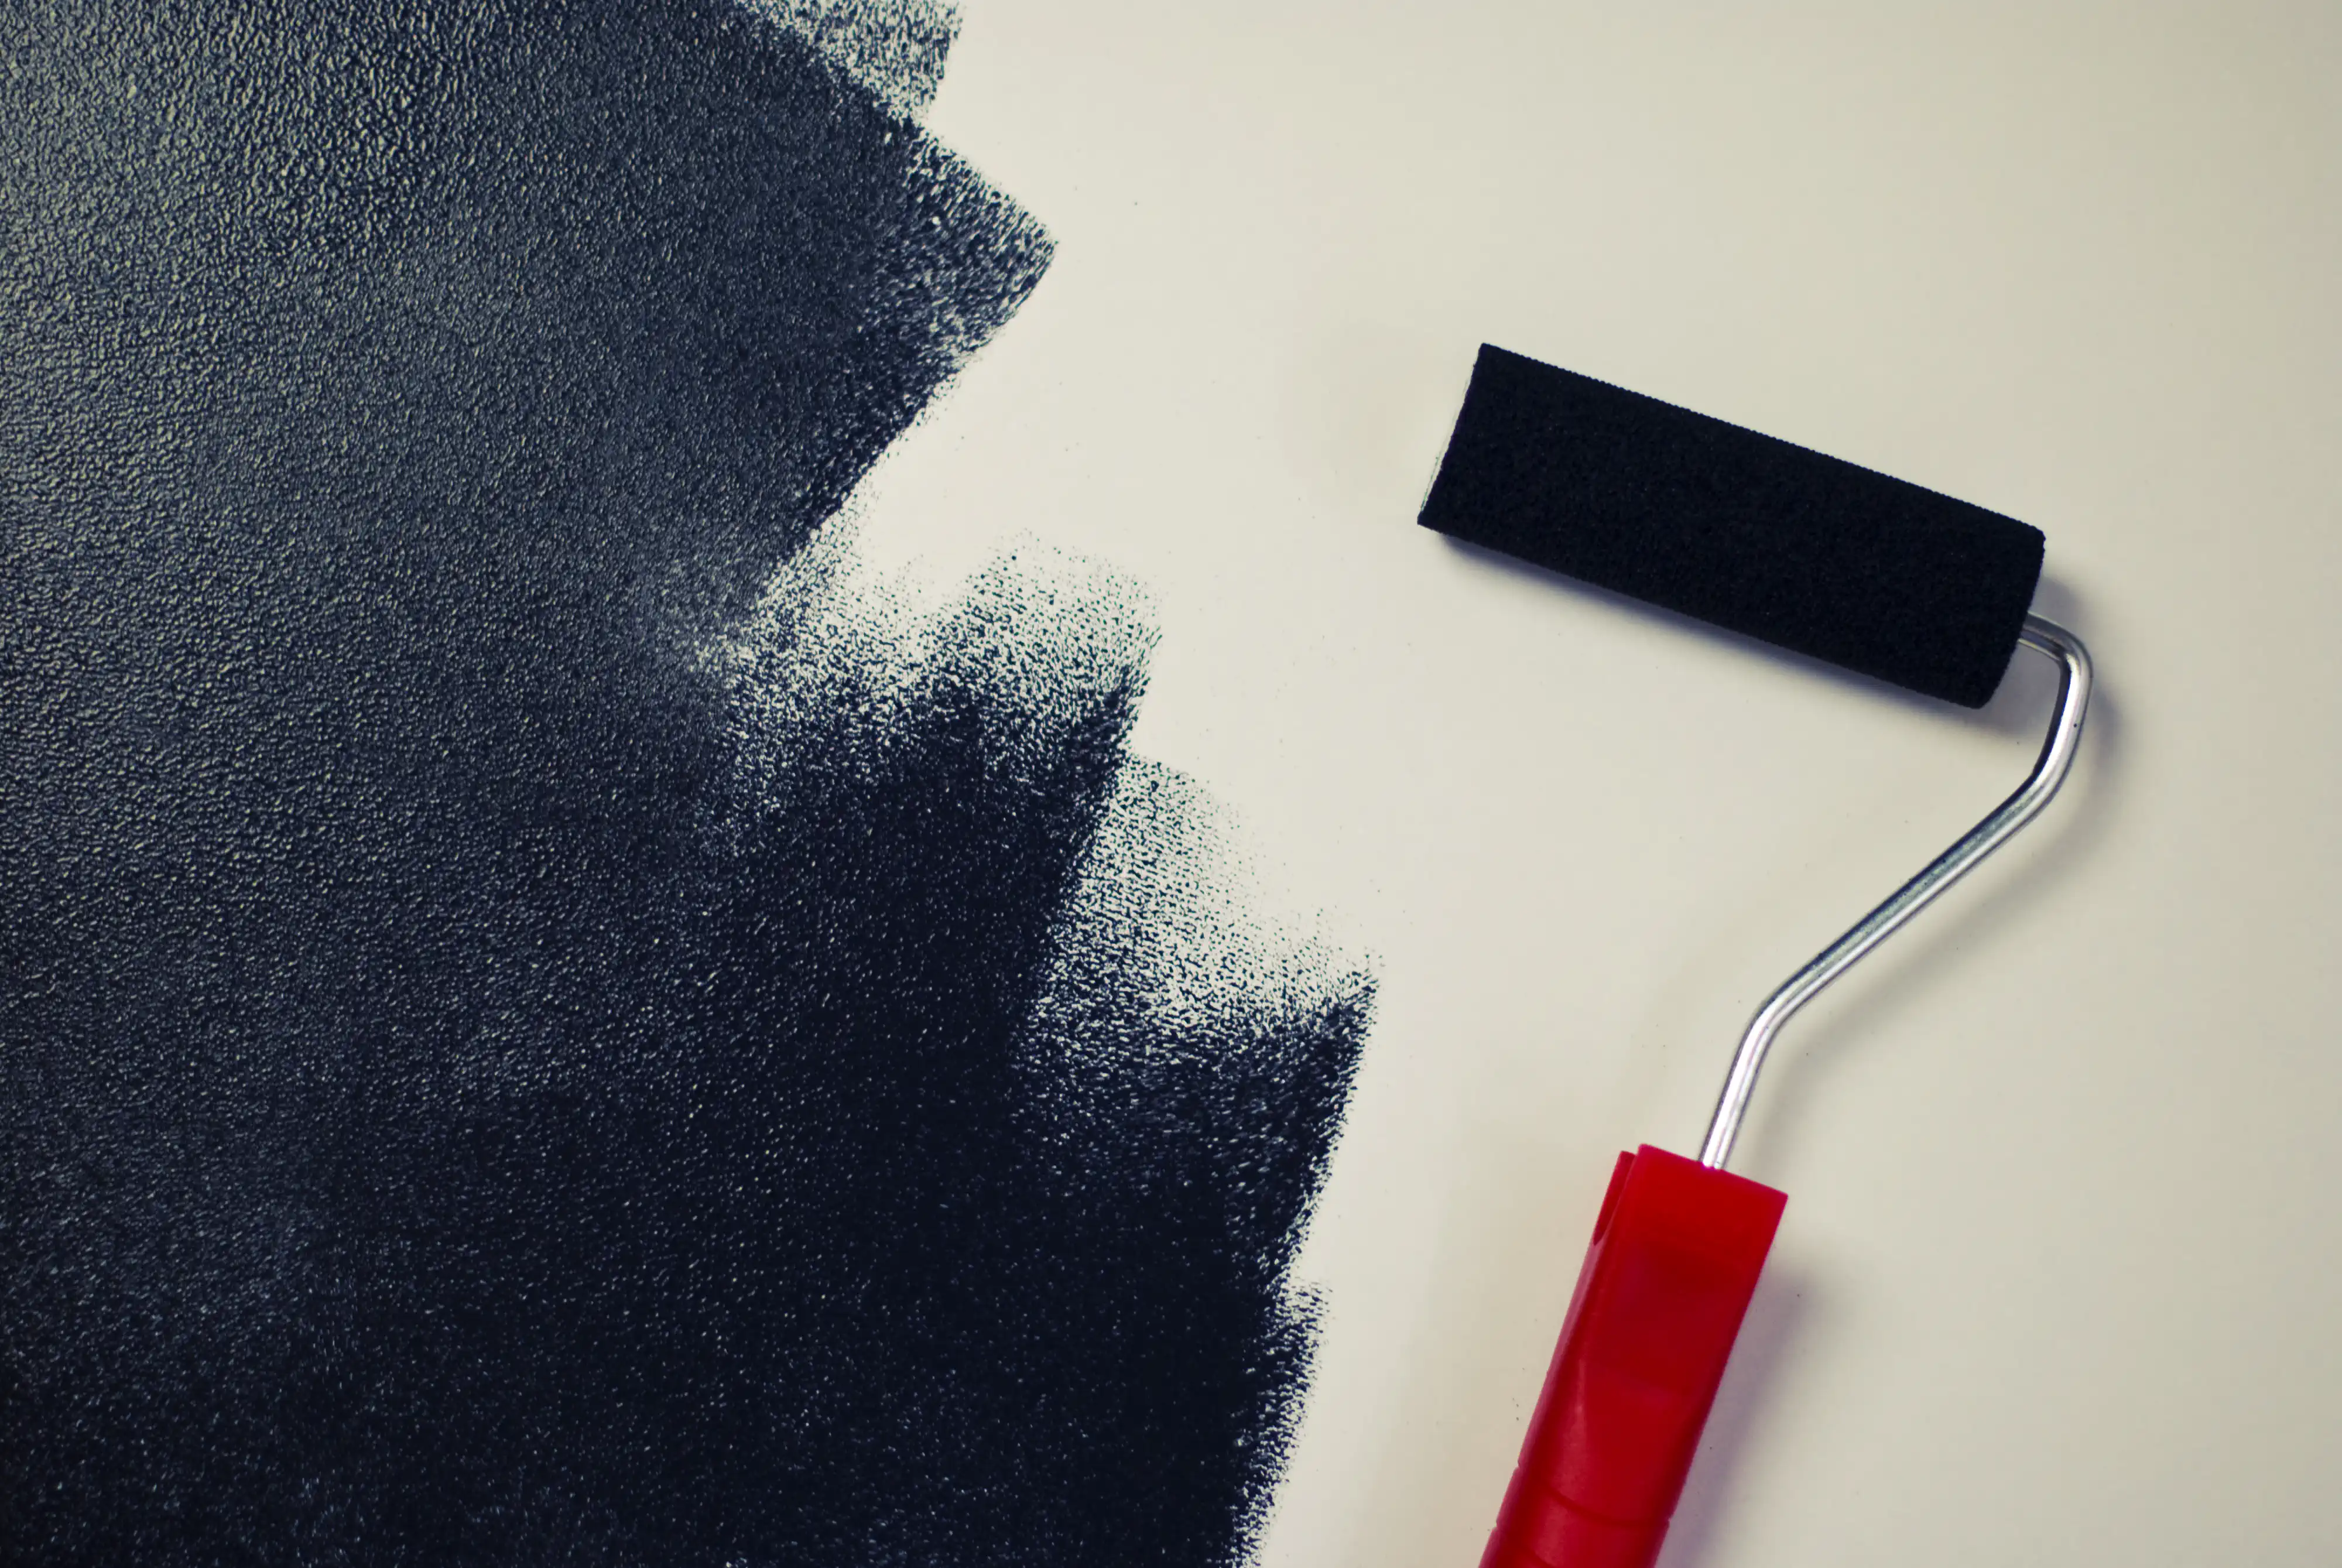 Close-up of a dark textured paint being applied on a white surface with a red-handled roller